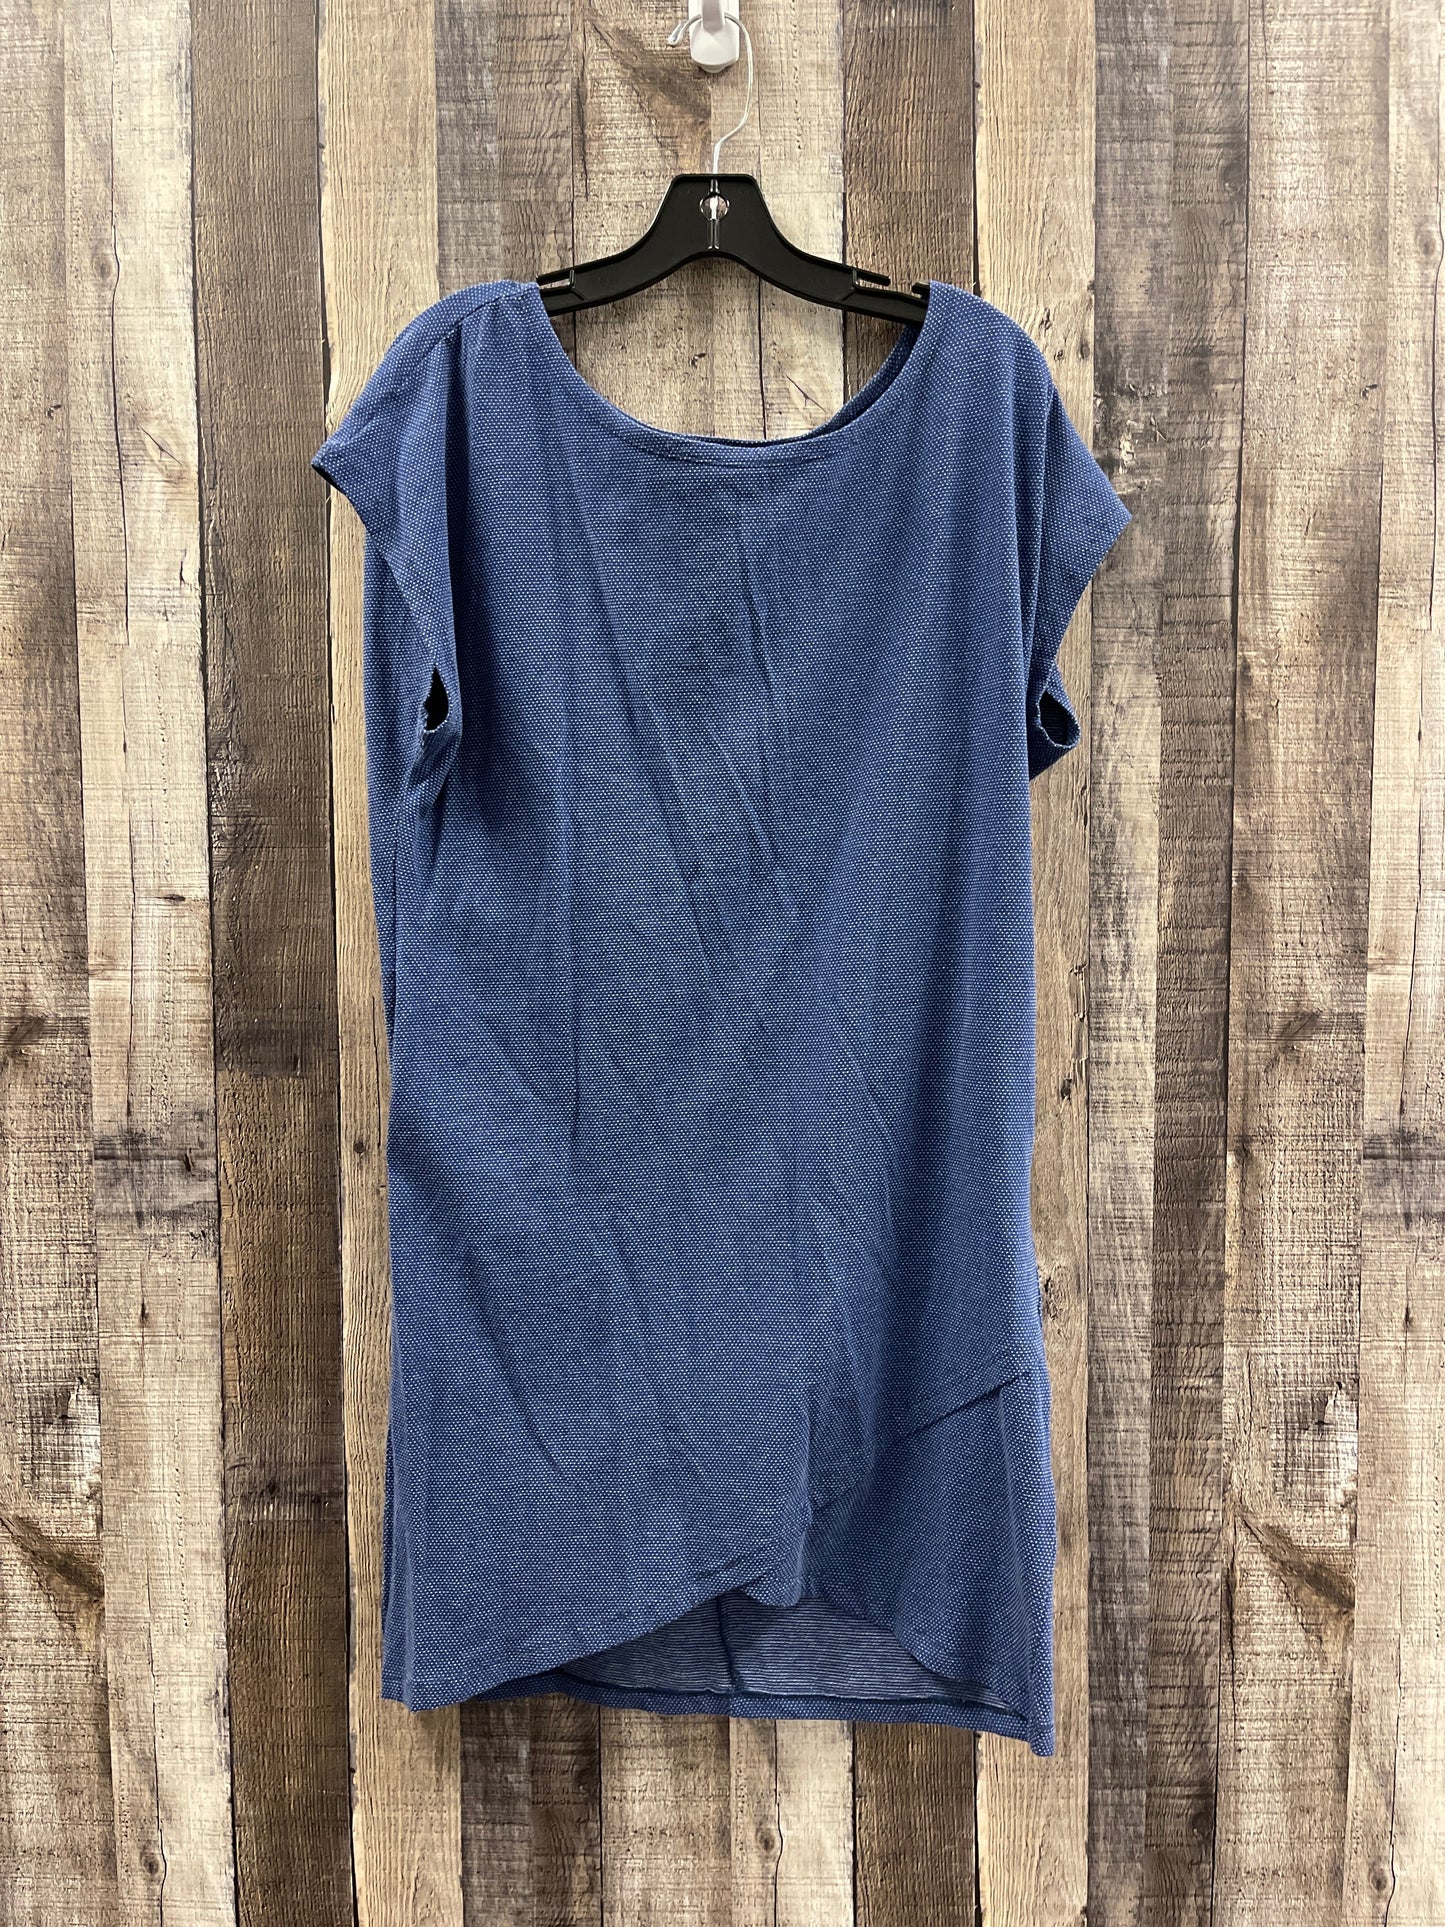 Blue Dress Casual Short Synergy, Size L